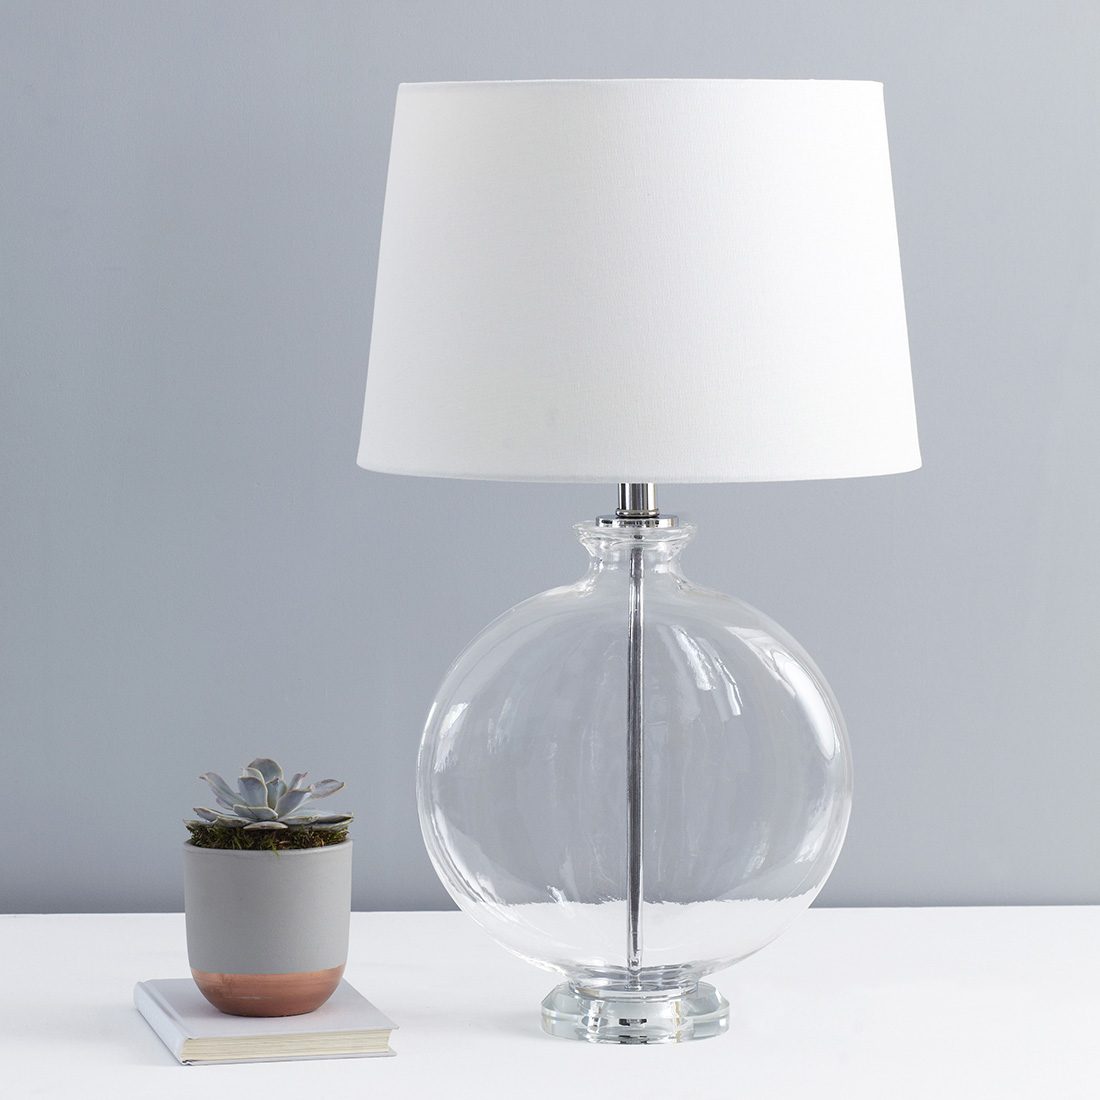 Slim Round Glass Table Lamp With White, Table Lamp With Glass Shade Uk